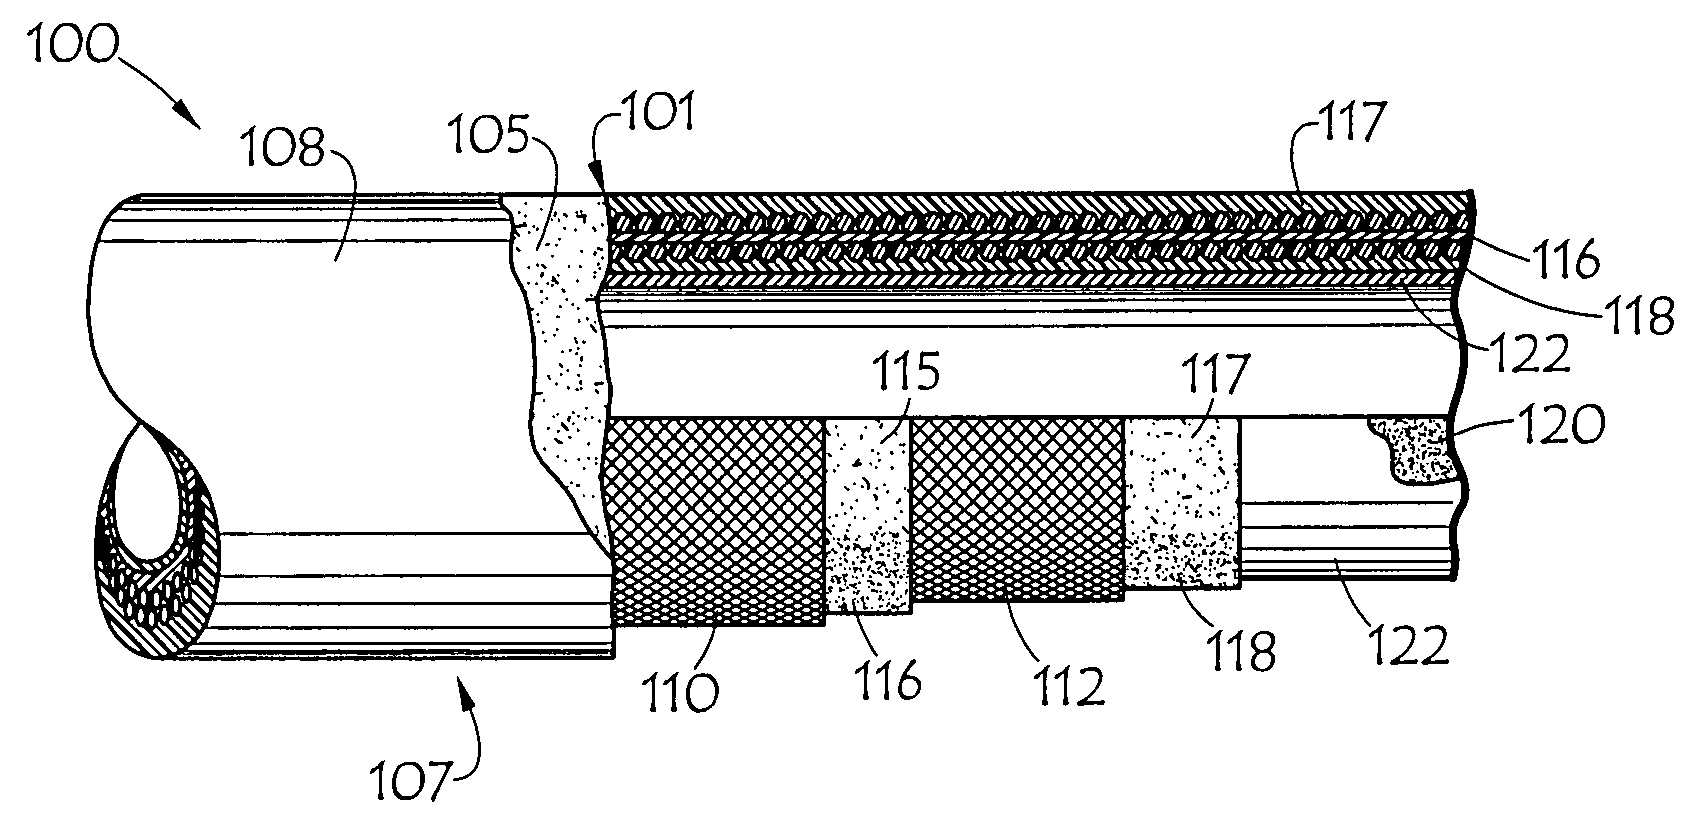 Heated fluid conduit end covers, systems and methods